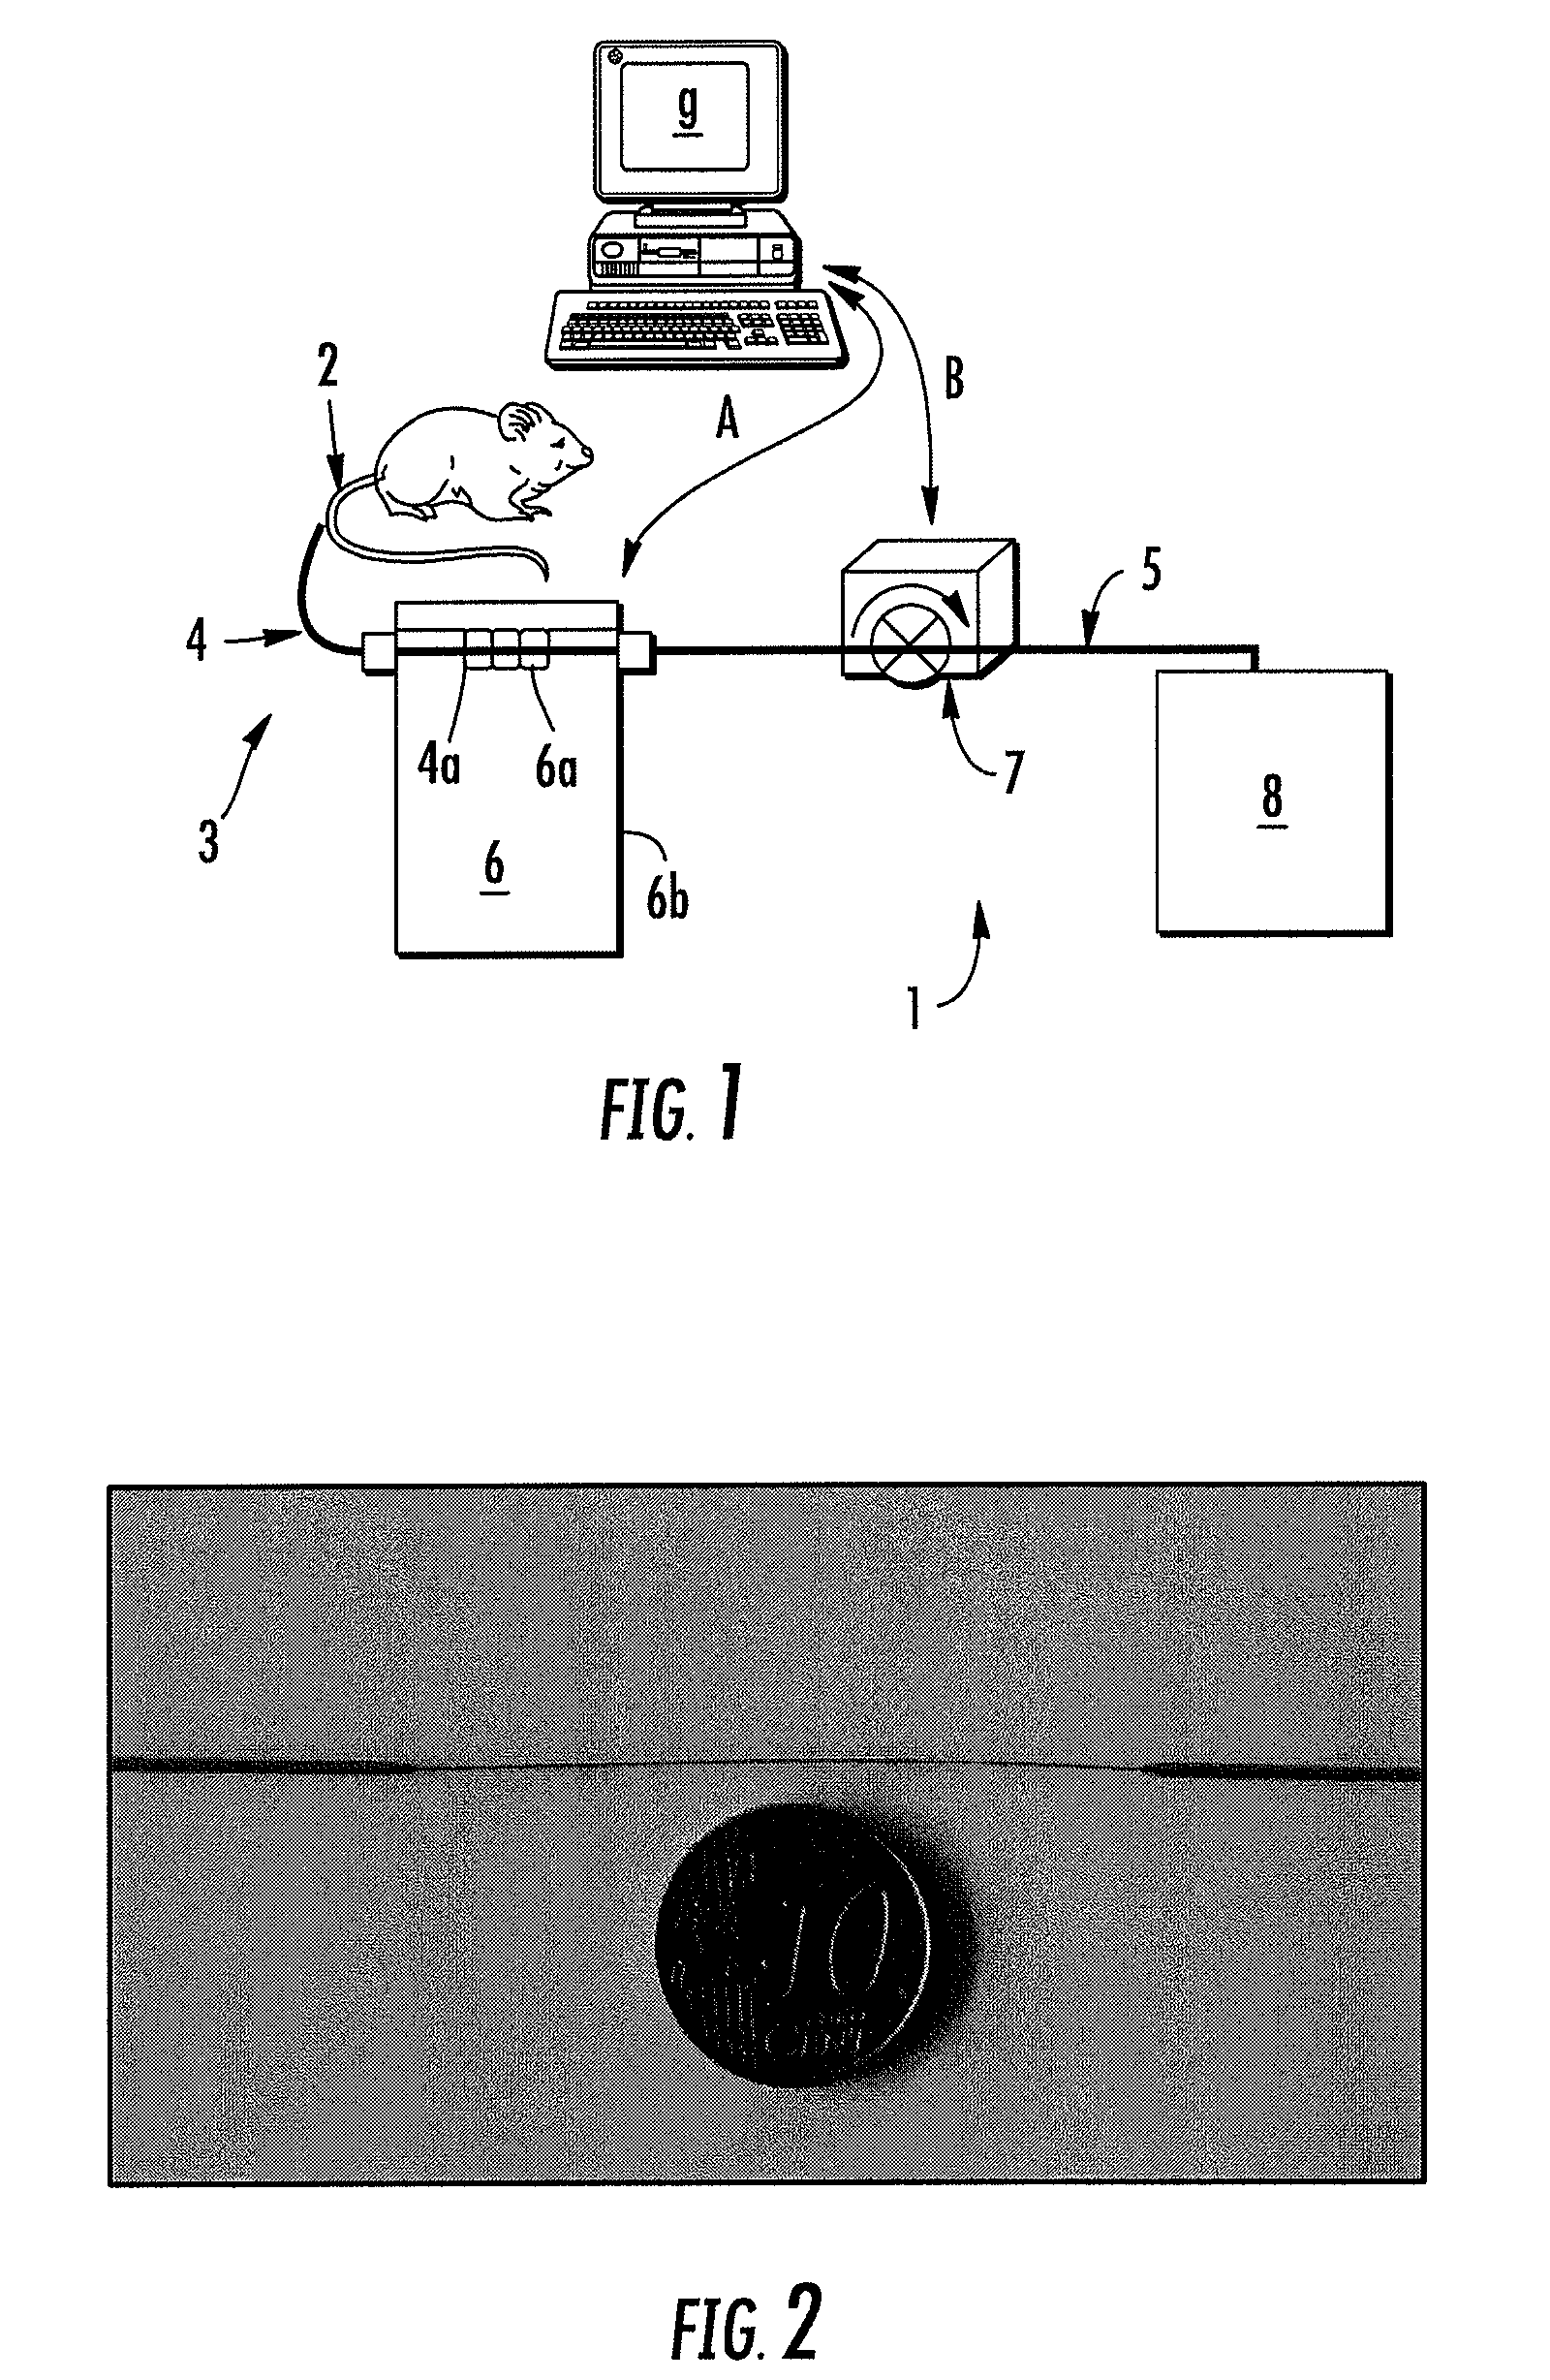 Device and method for counting elementary particles emitted by a fluid in a conduit